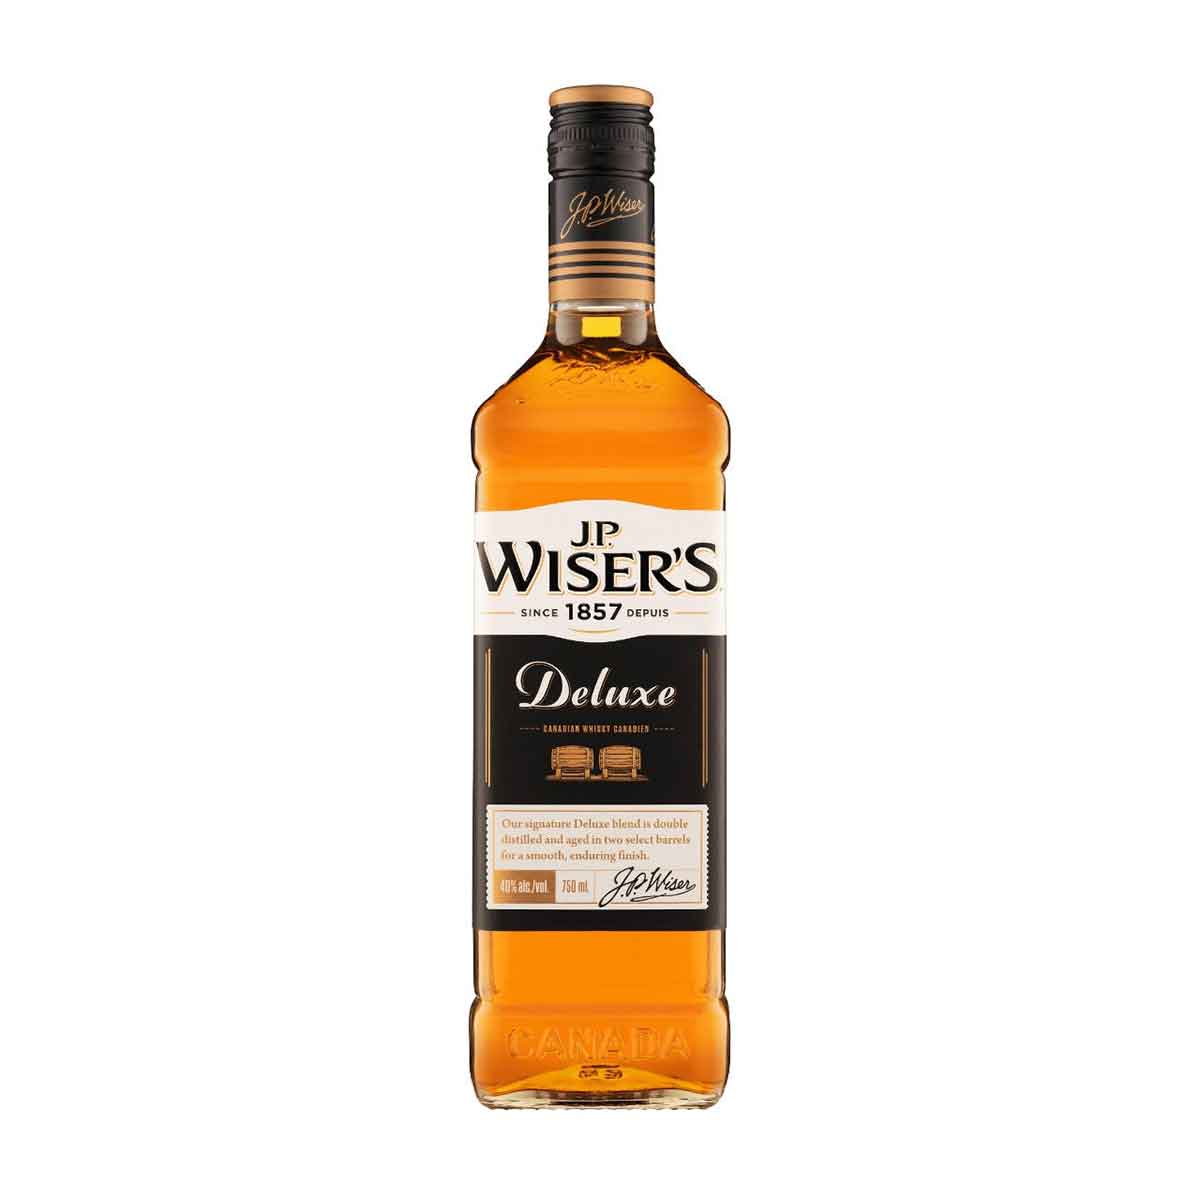 TAG Liquor Stores BC-WISERS DELUXE 750ML